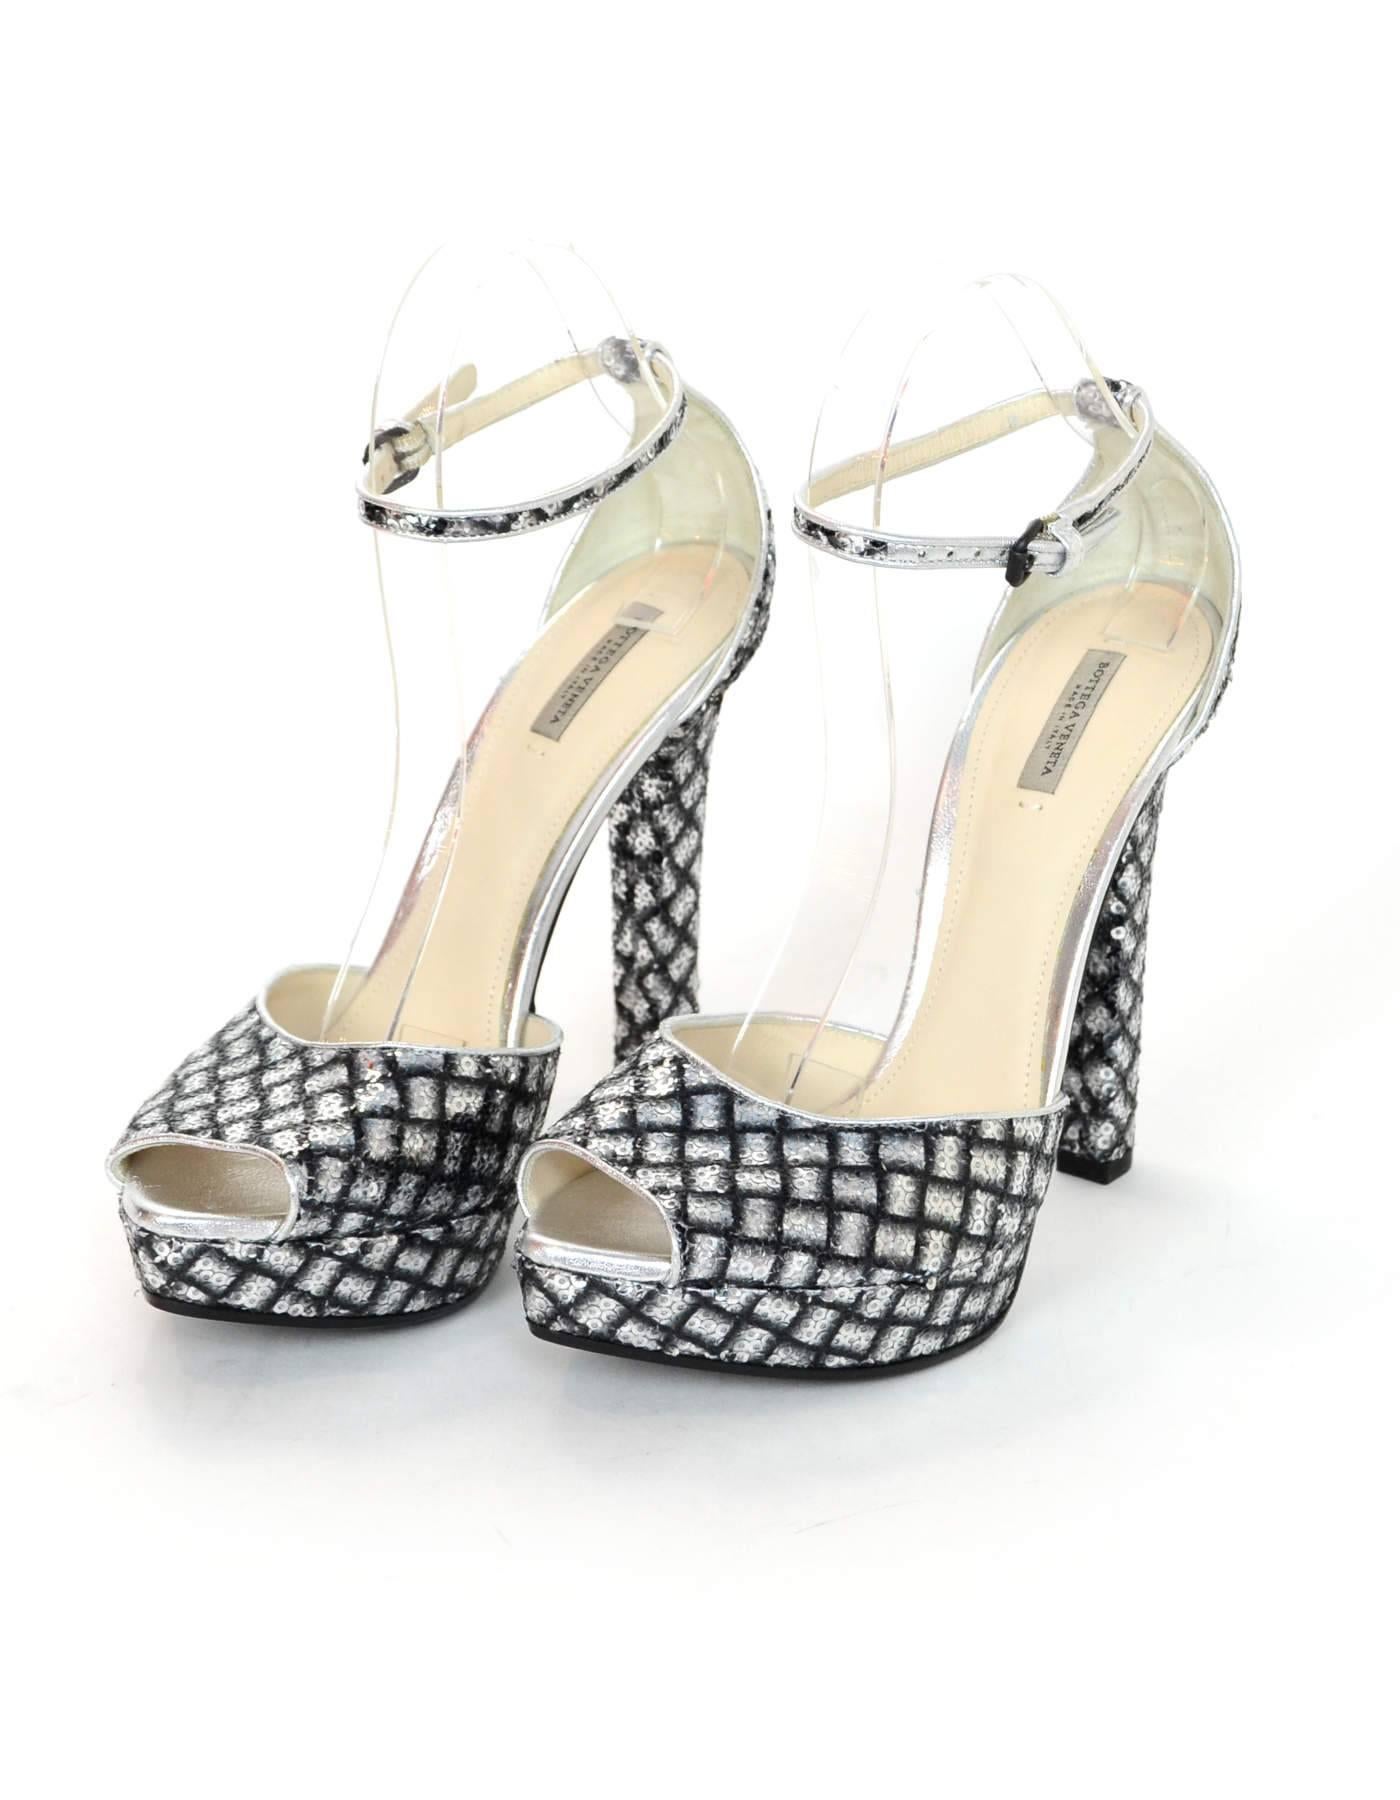 Bottega Veneta Silver Sequin Open-Toe Sandals Sz 38.5 NEW

Made In: Italy
Color: Silver
Materials: Sequin
Closure/Opening: Buckle closure at ankle
Sole Stamp: Bottega Veneta Made in Italy 38.5
Overall Condition: Excellent pre-owned condition -